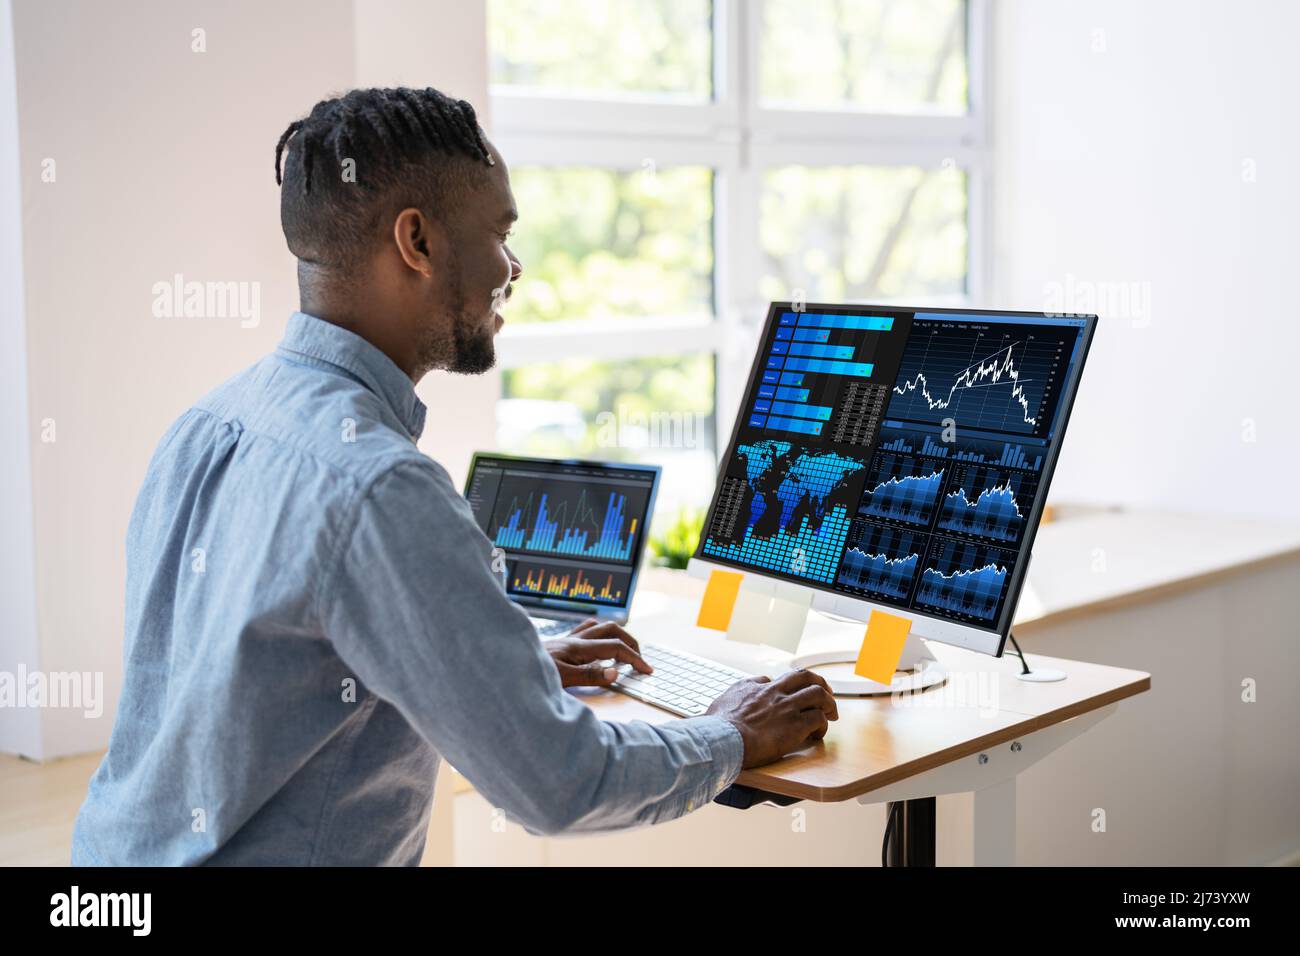 African American Business Data Analyst Man Using Computer Stock Photo